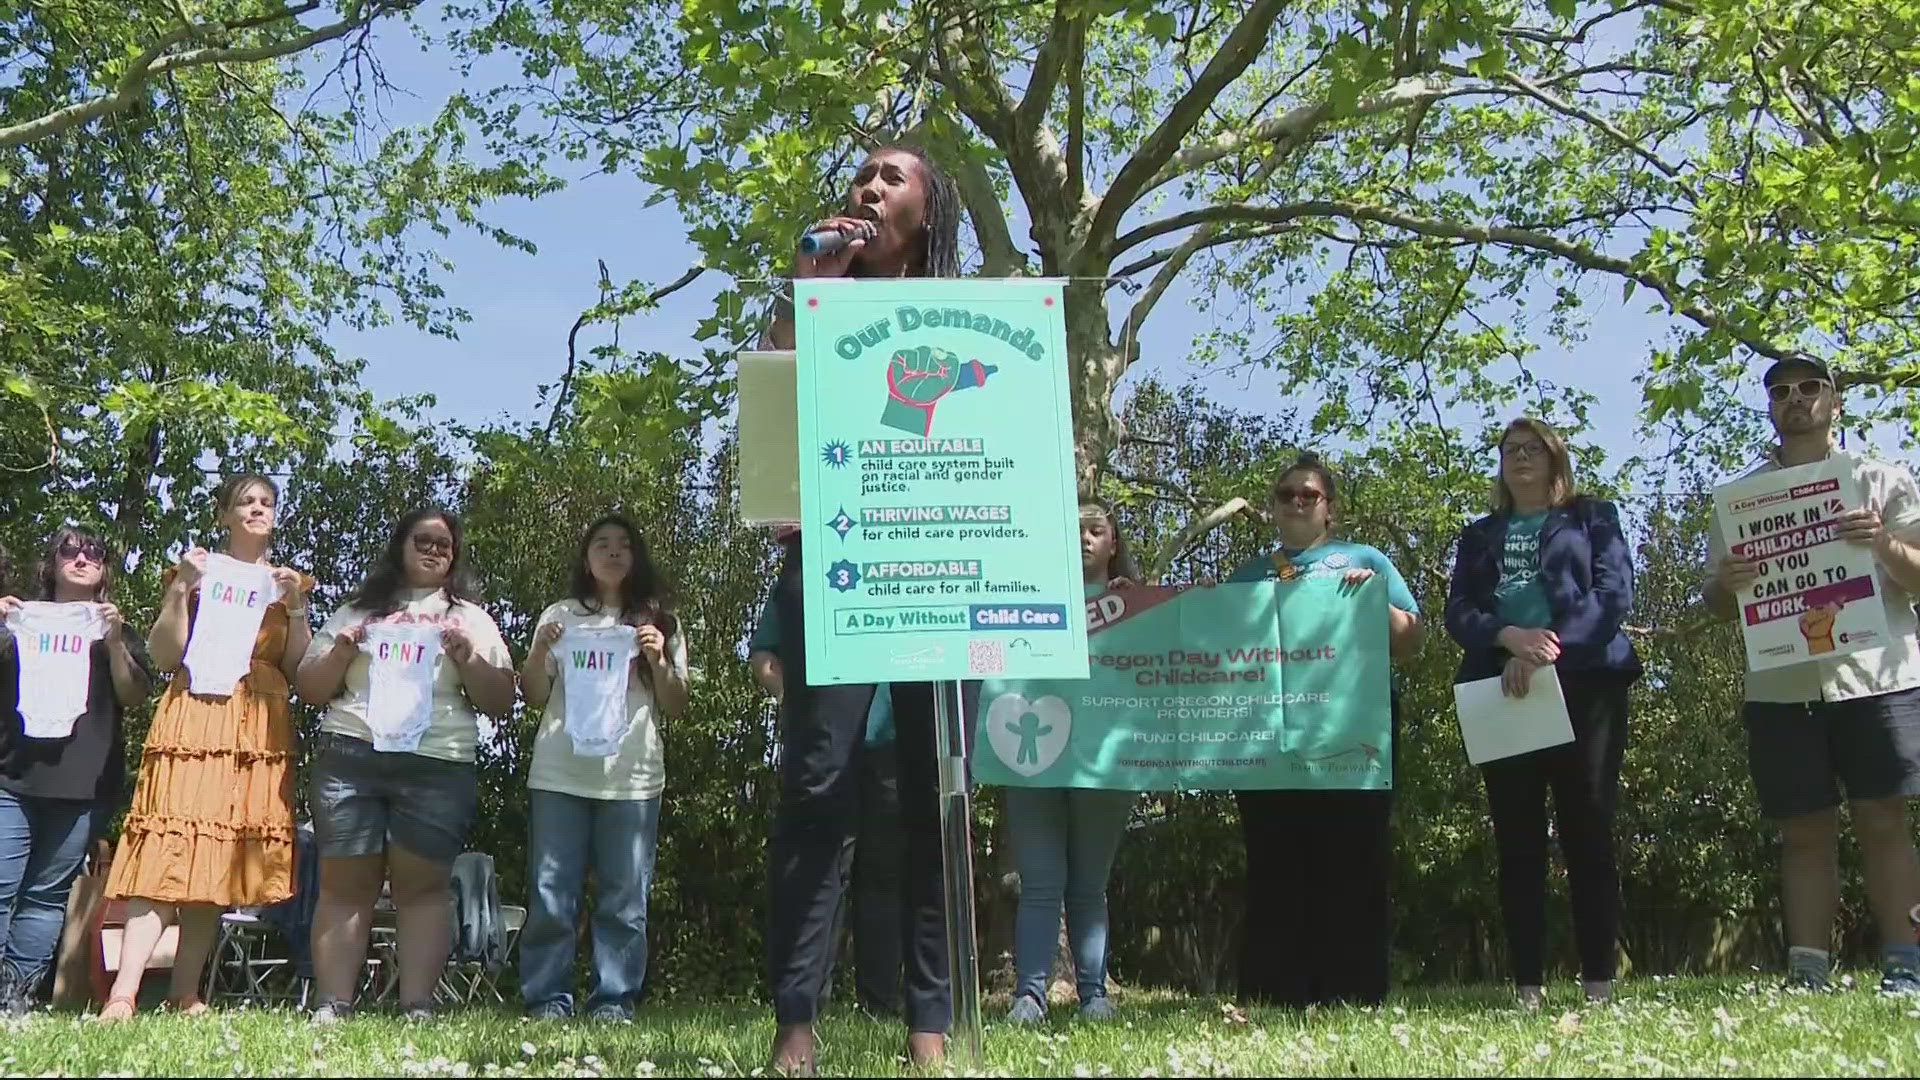 Nearly 20 providers in seven cities in the state gathered to raise awareness about what they're calling a child care crisis.